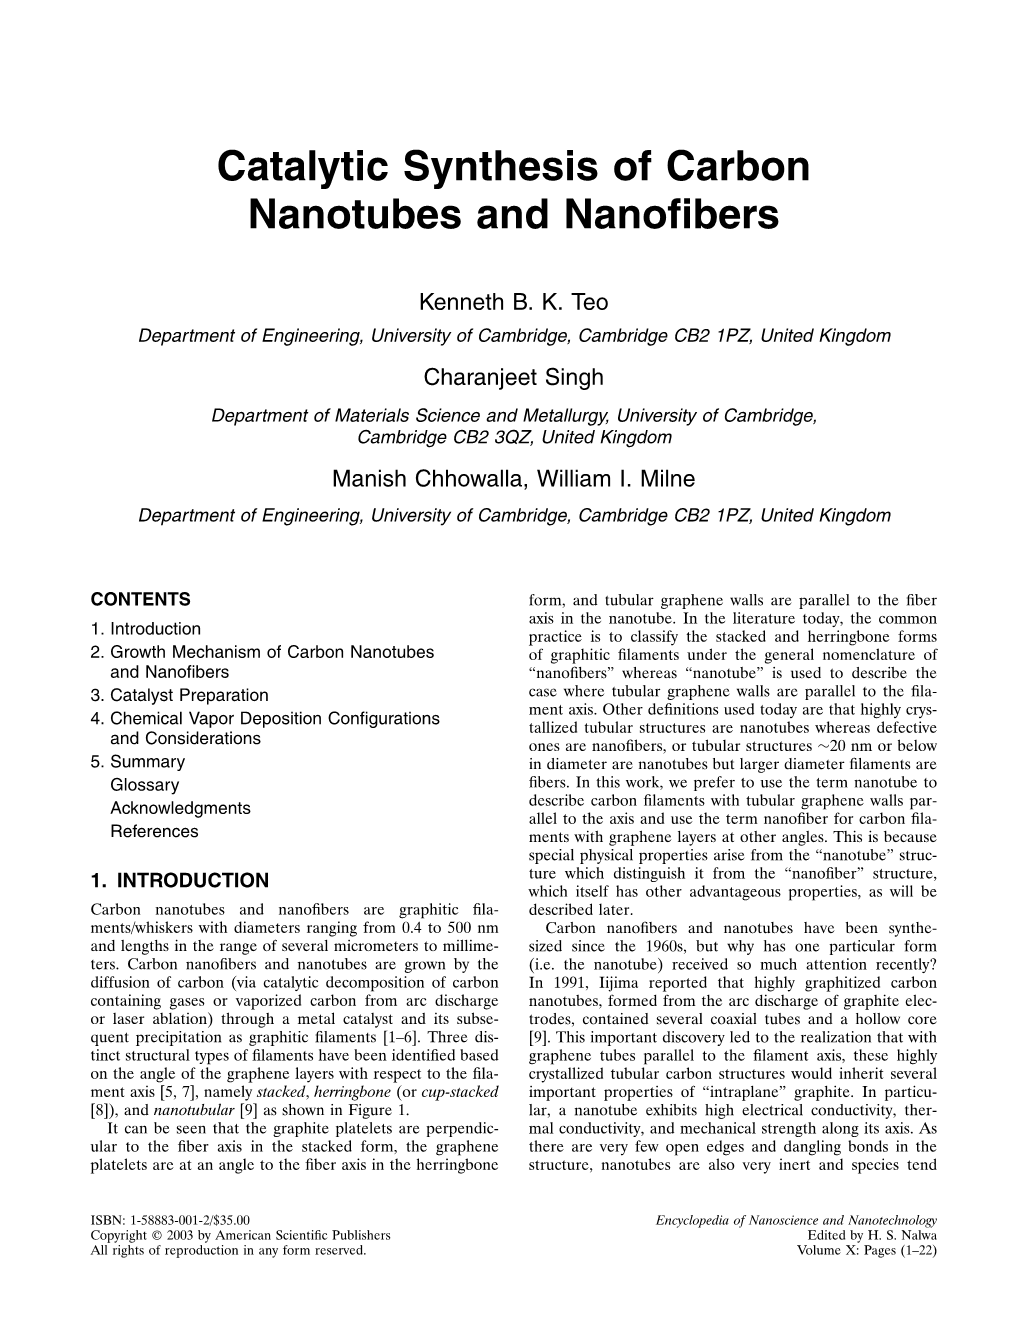 Catalytic Synthesis of Carbon Nanotubes and Nanofibers